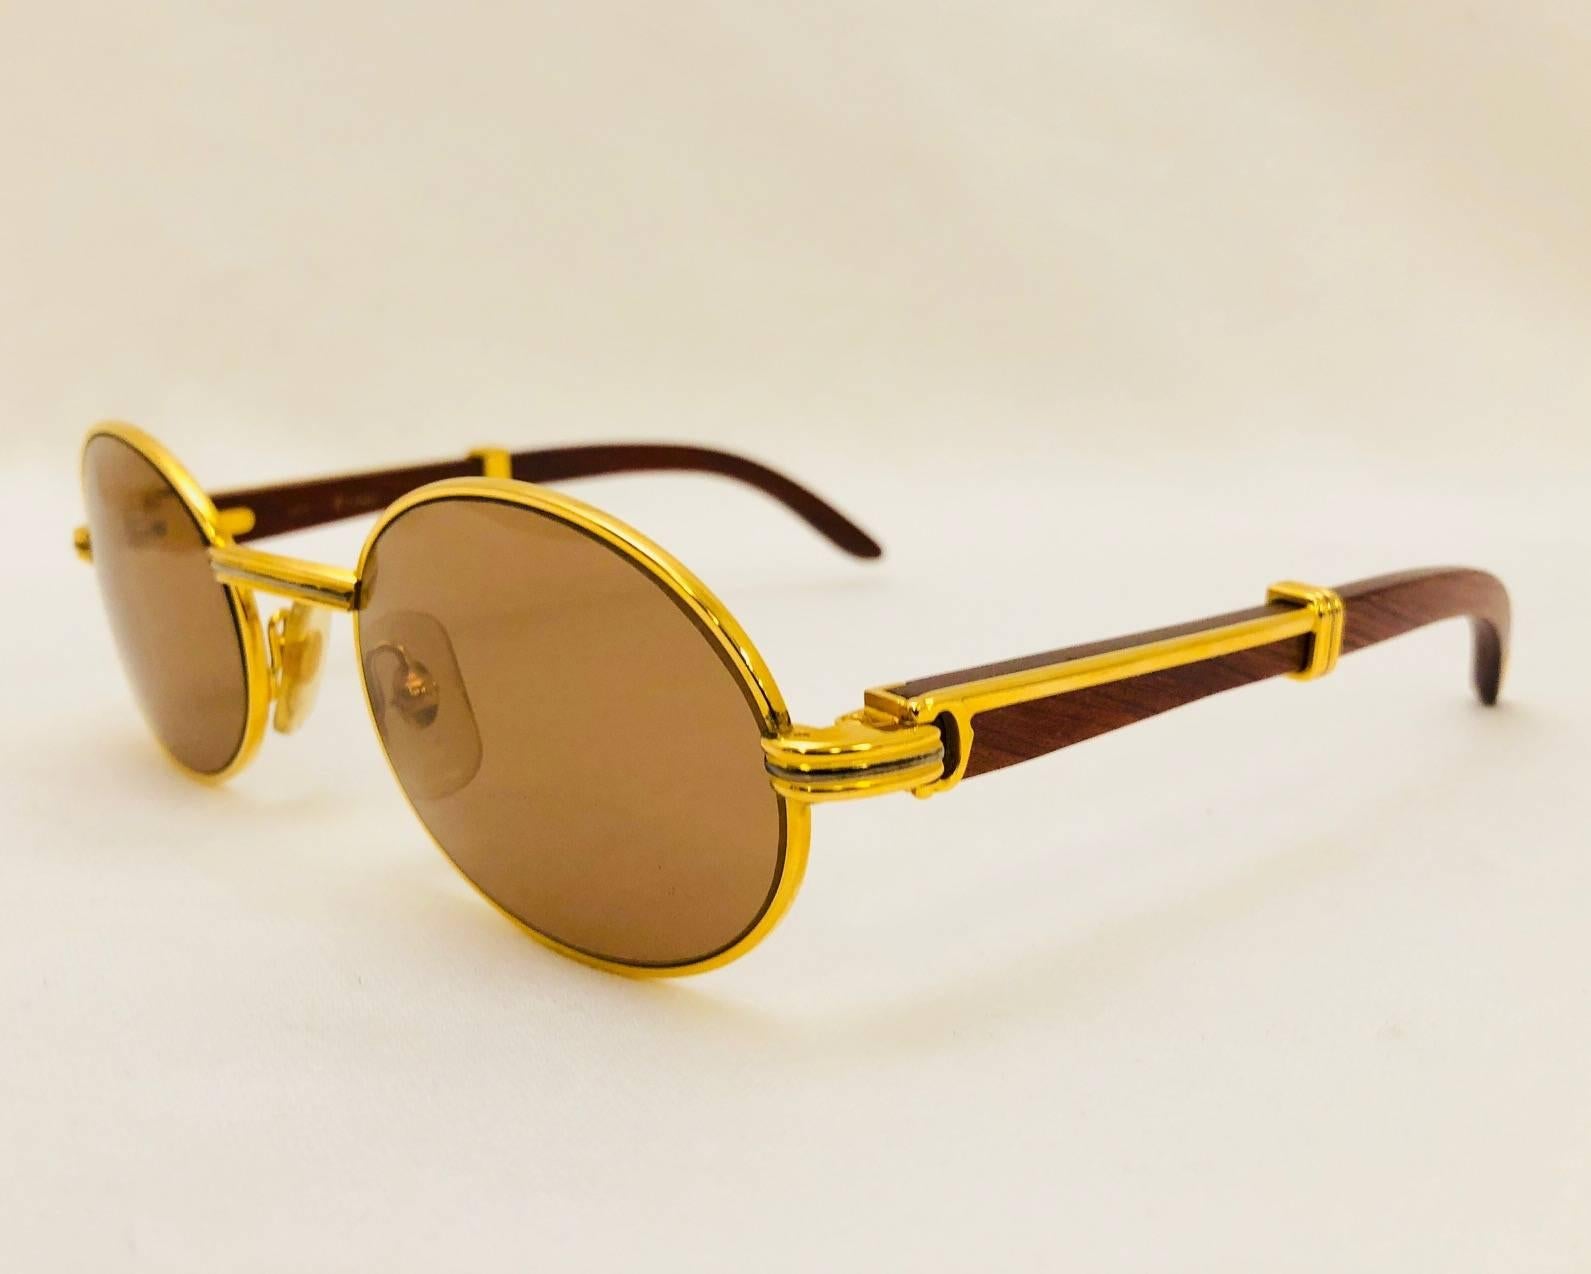 Cartier crafted the ultimate pair of sunglasses out of 18K Gold and Rosewood.  Known as 